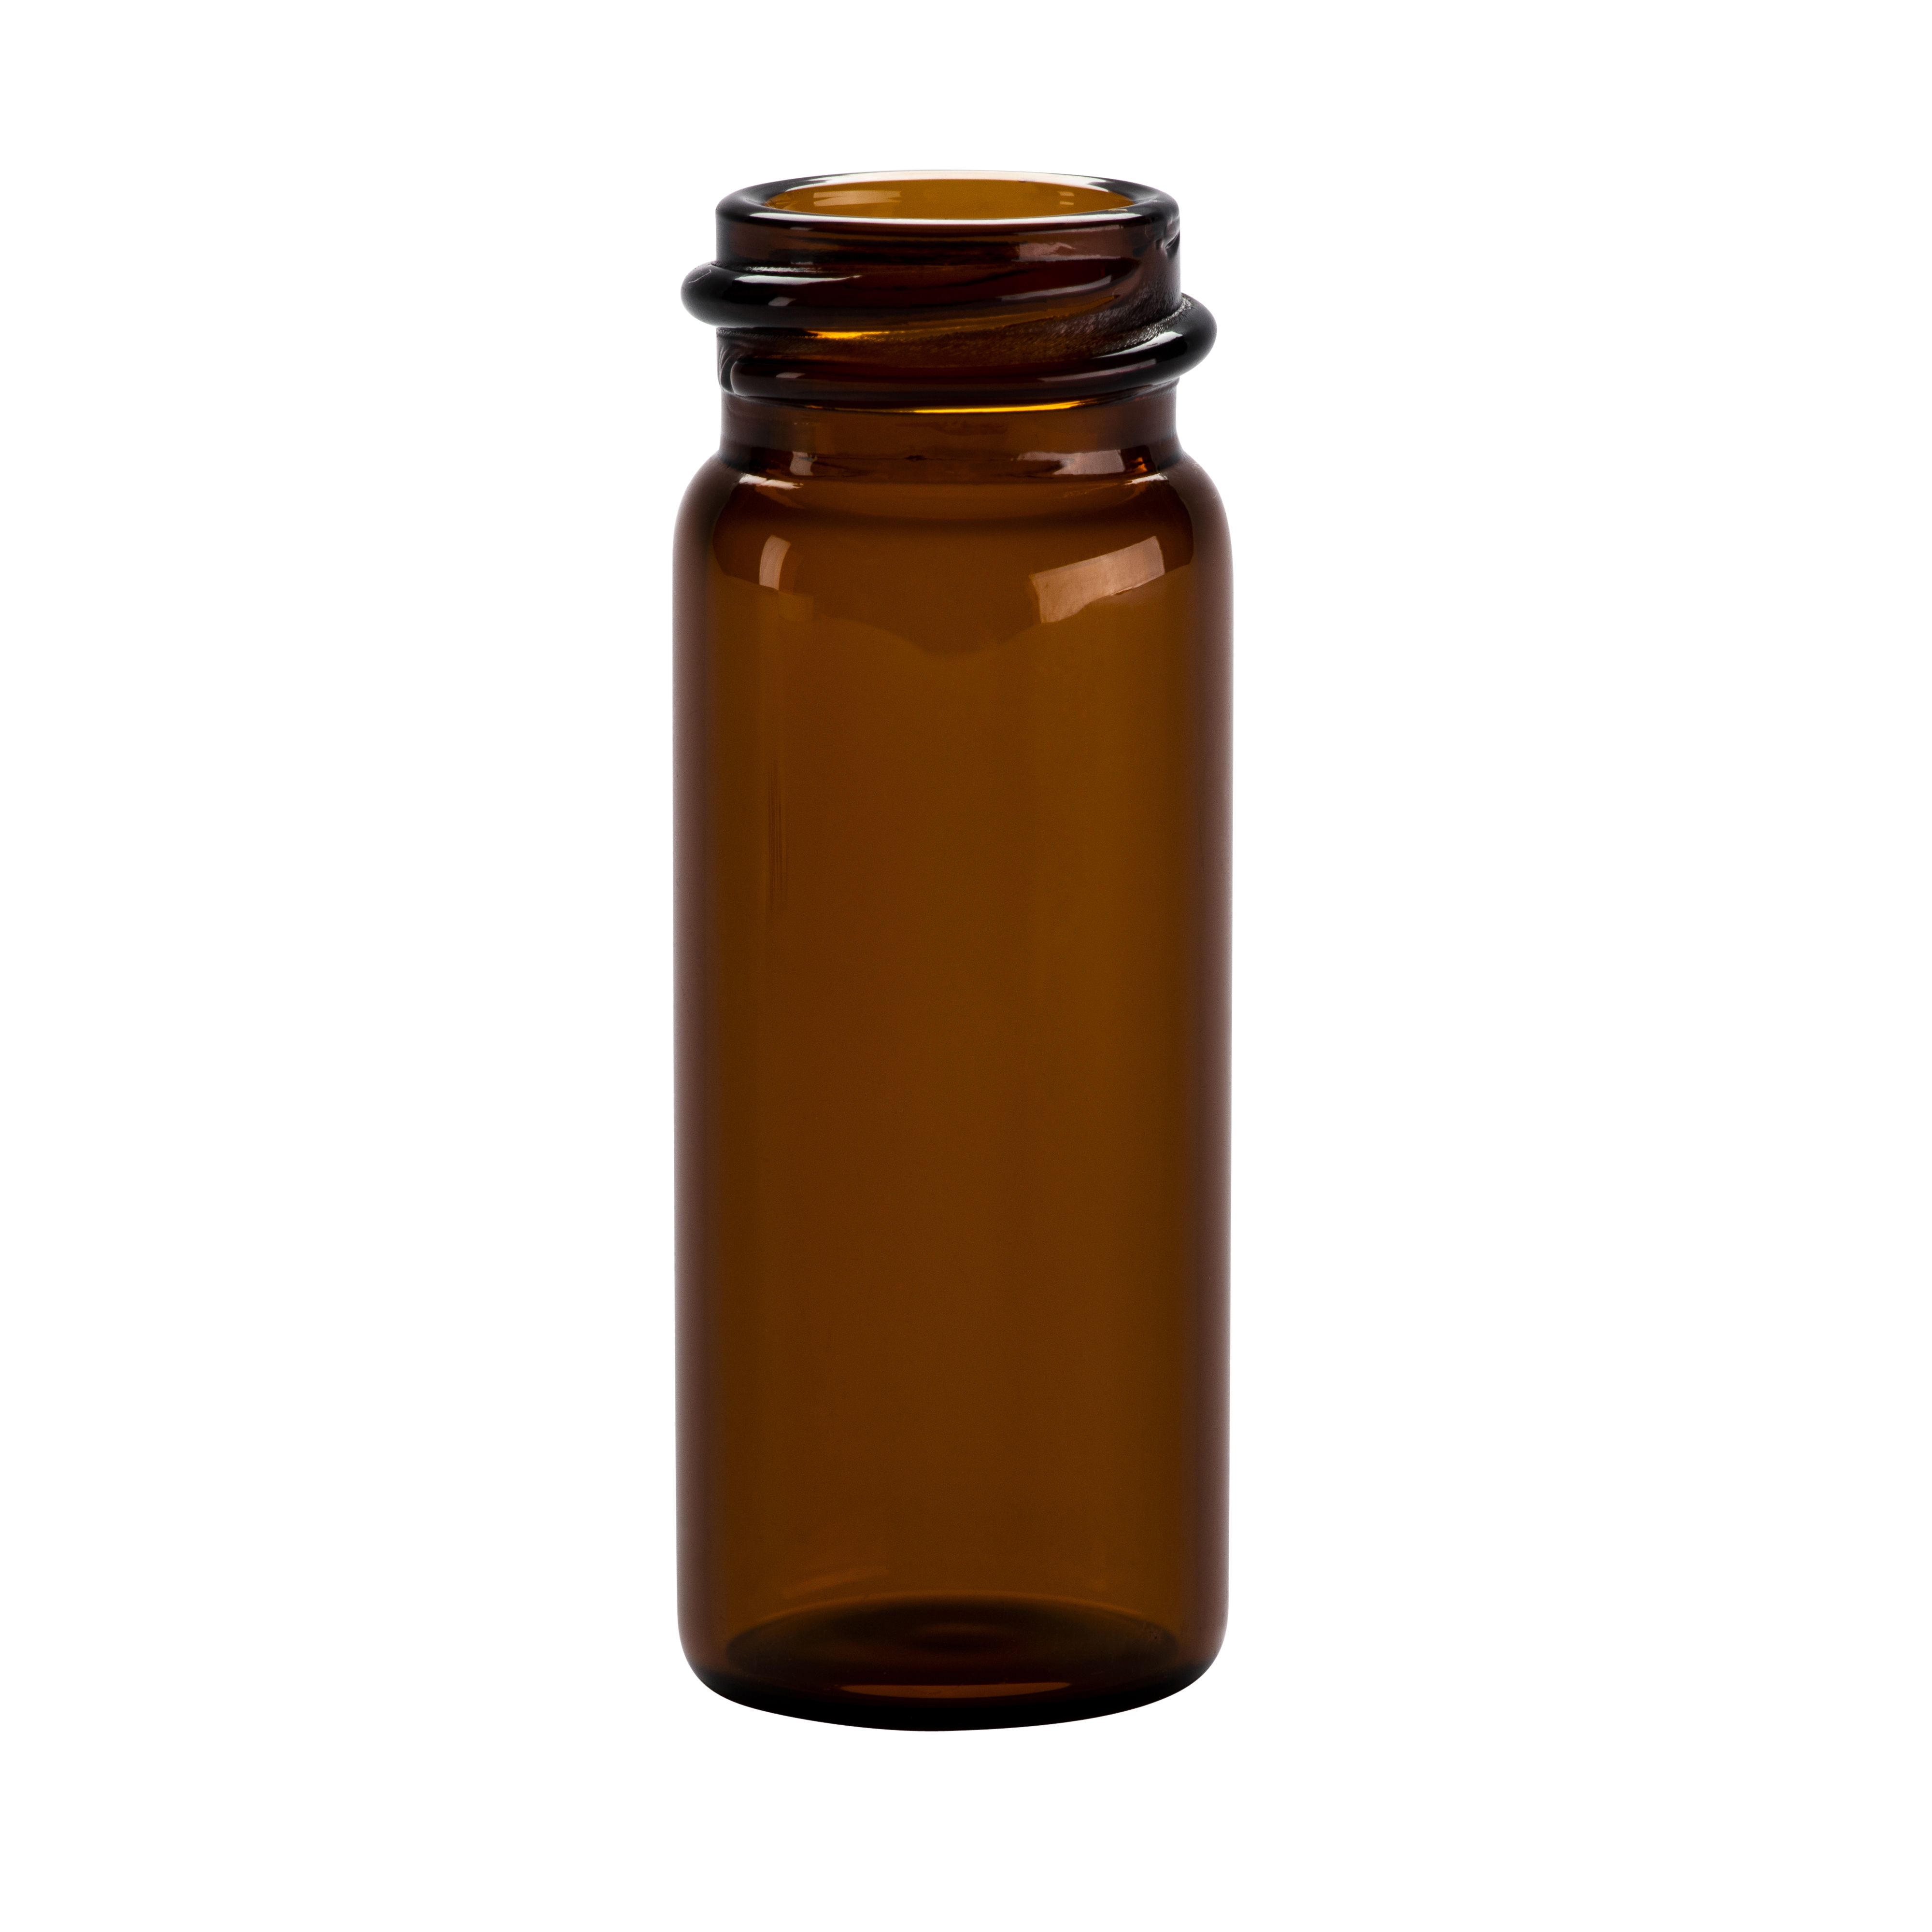 Brown glass container